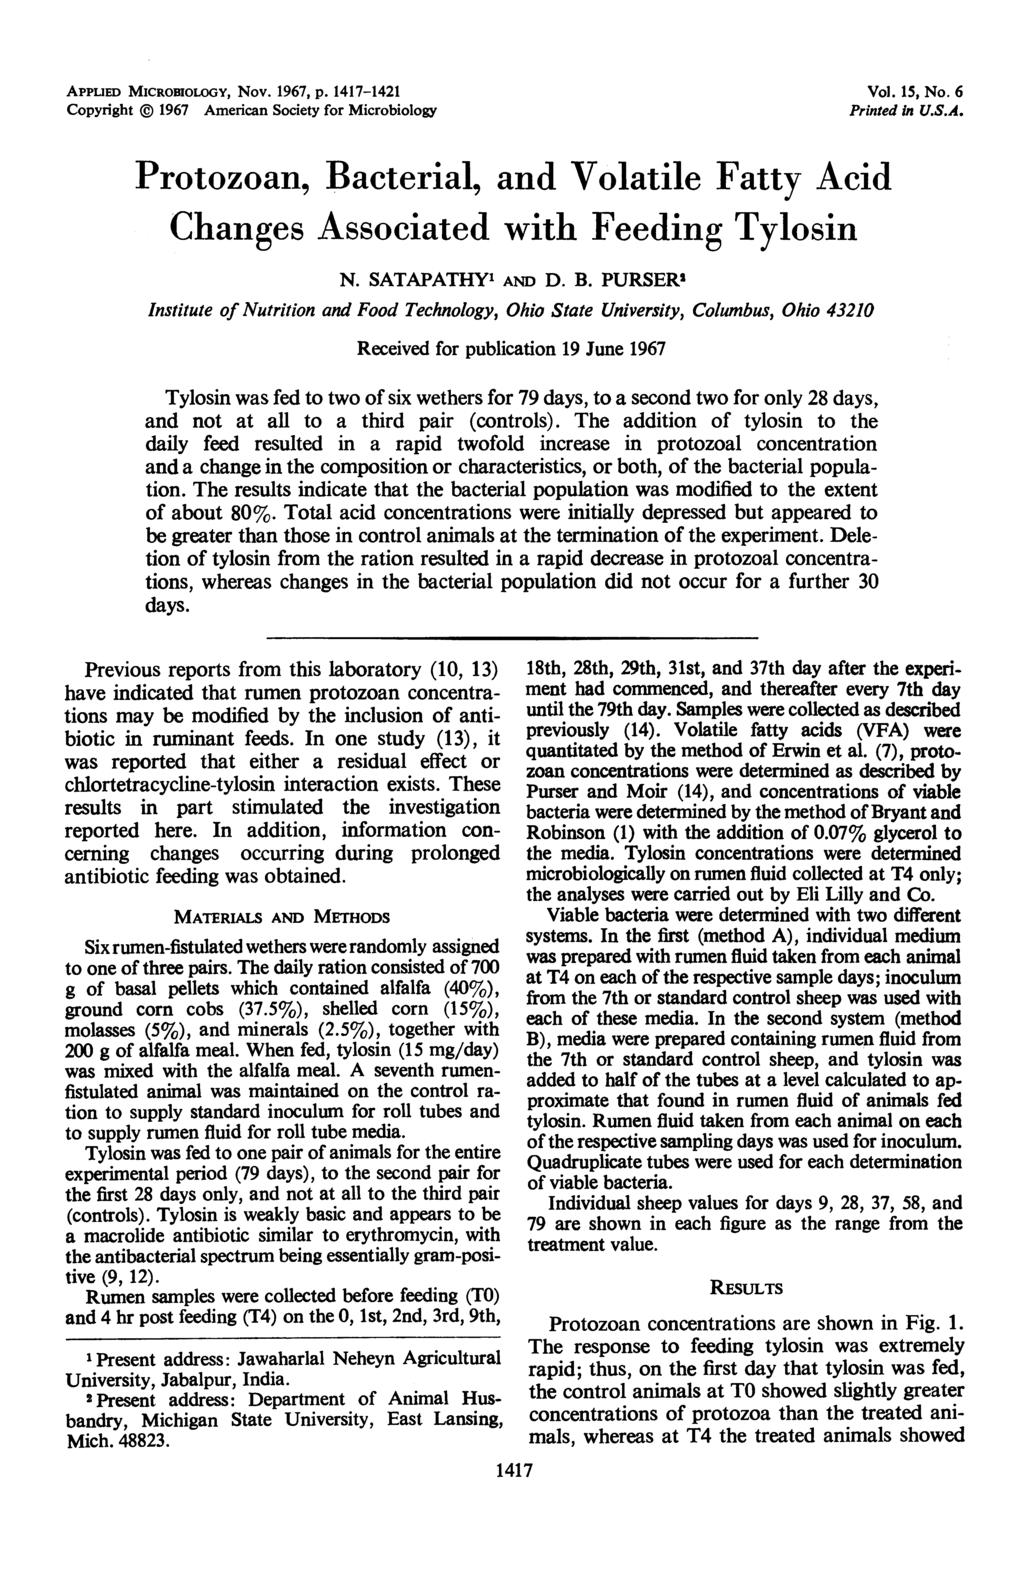 APPLIED MICROBIOLOGY, Nov. 1967, p. 1417-1421 Copyright 1967 American Society for Microbiology Protozoan, Bacterial, and Volatile Fatty Acid Changes Associated with Feeding Tylosin N.